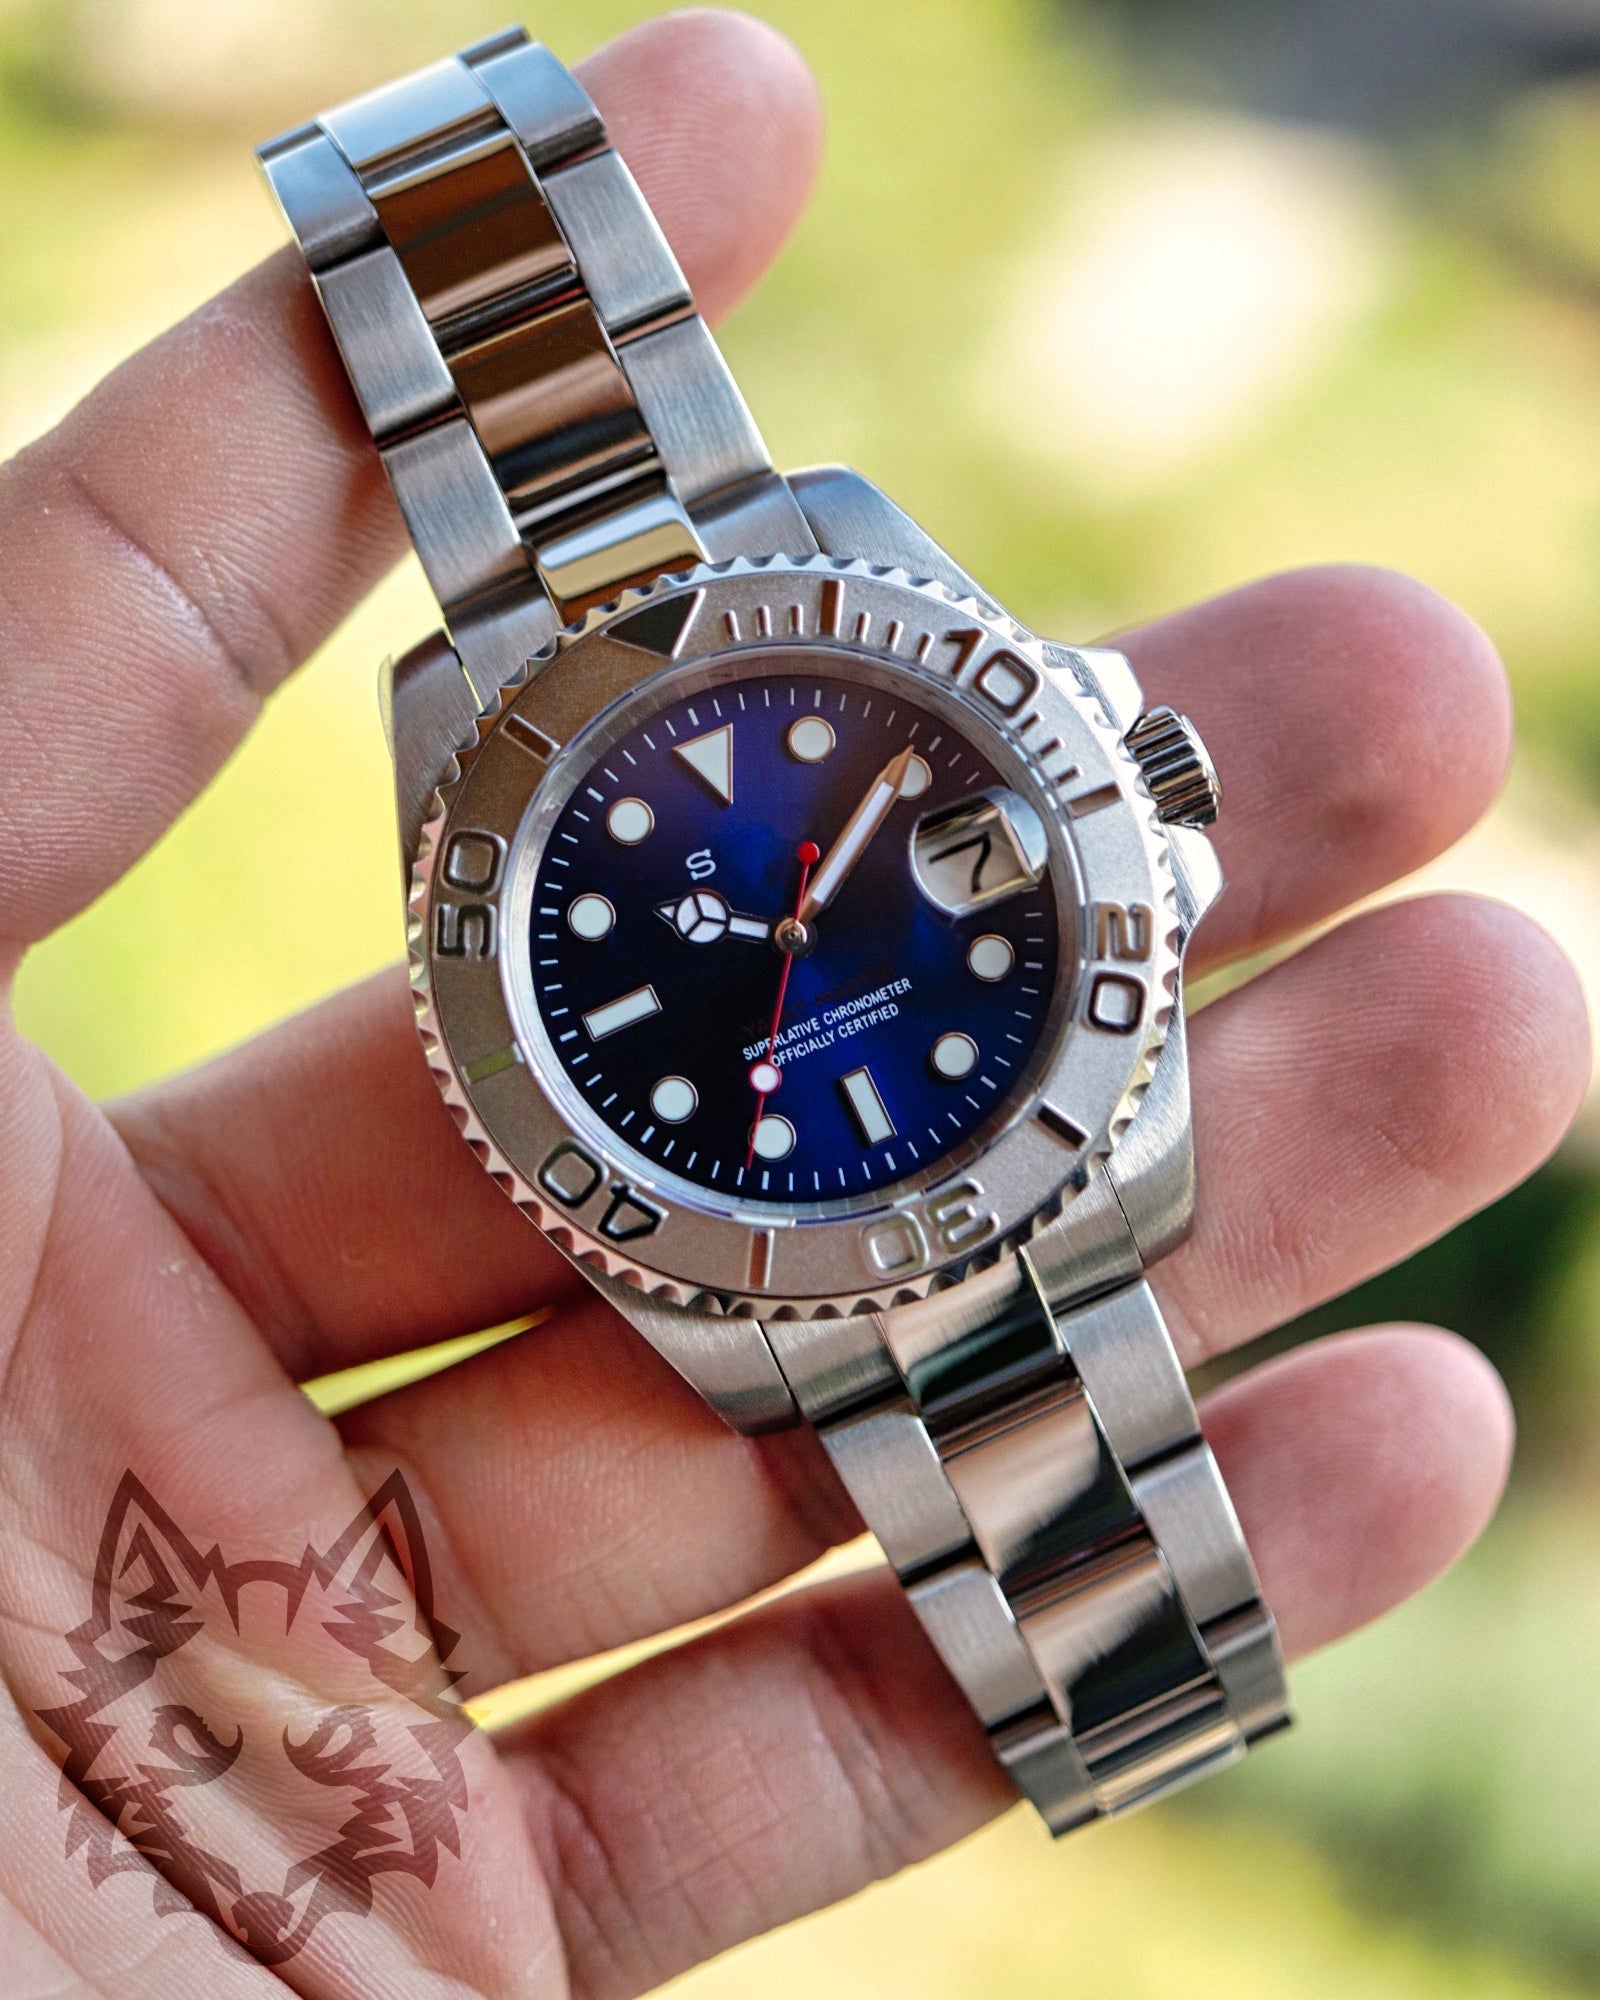 Seiko Mod Yacht Master Blue from Inarimod for just 299.90€